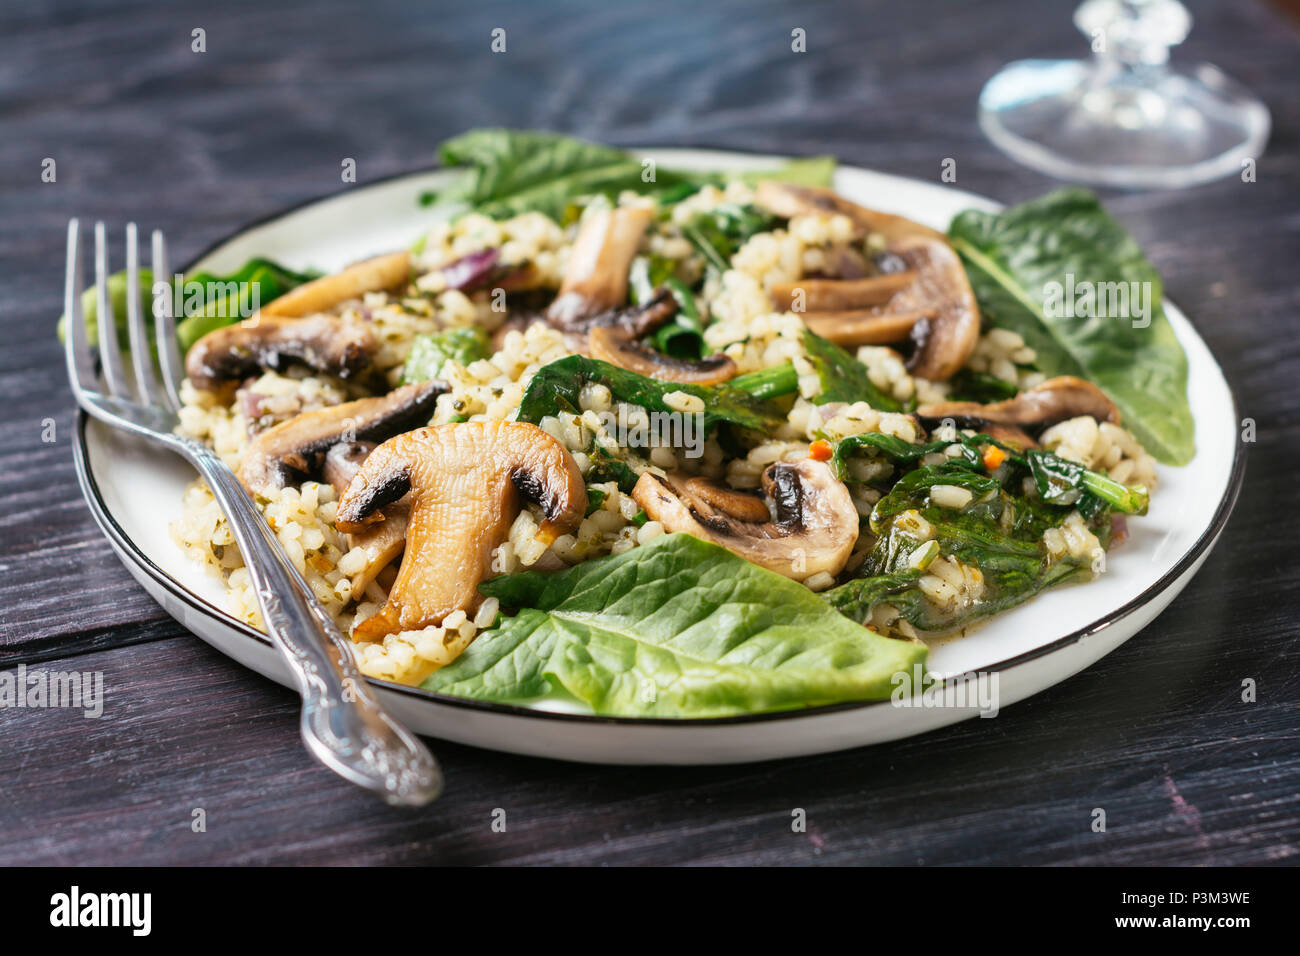 Plate with a Mushroom, Spinach Risotto Stock Photo